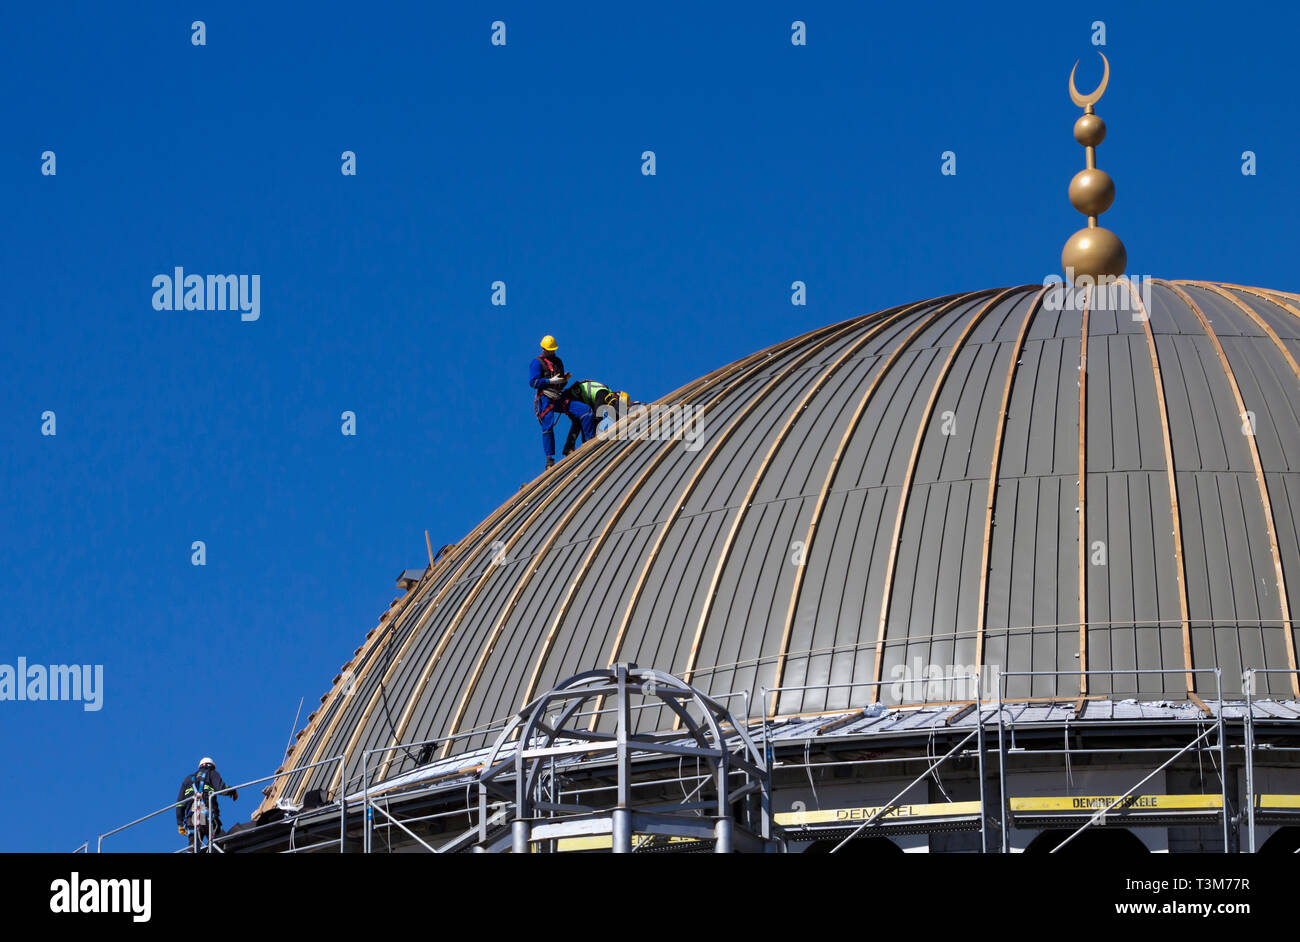 Taksim, Istanbul / Turkey - March 18th, 2019: The mosque construction continues as technicians inspect the dome. Stock Photo